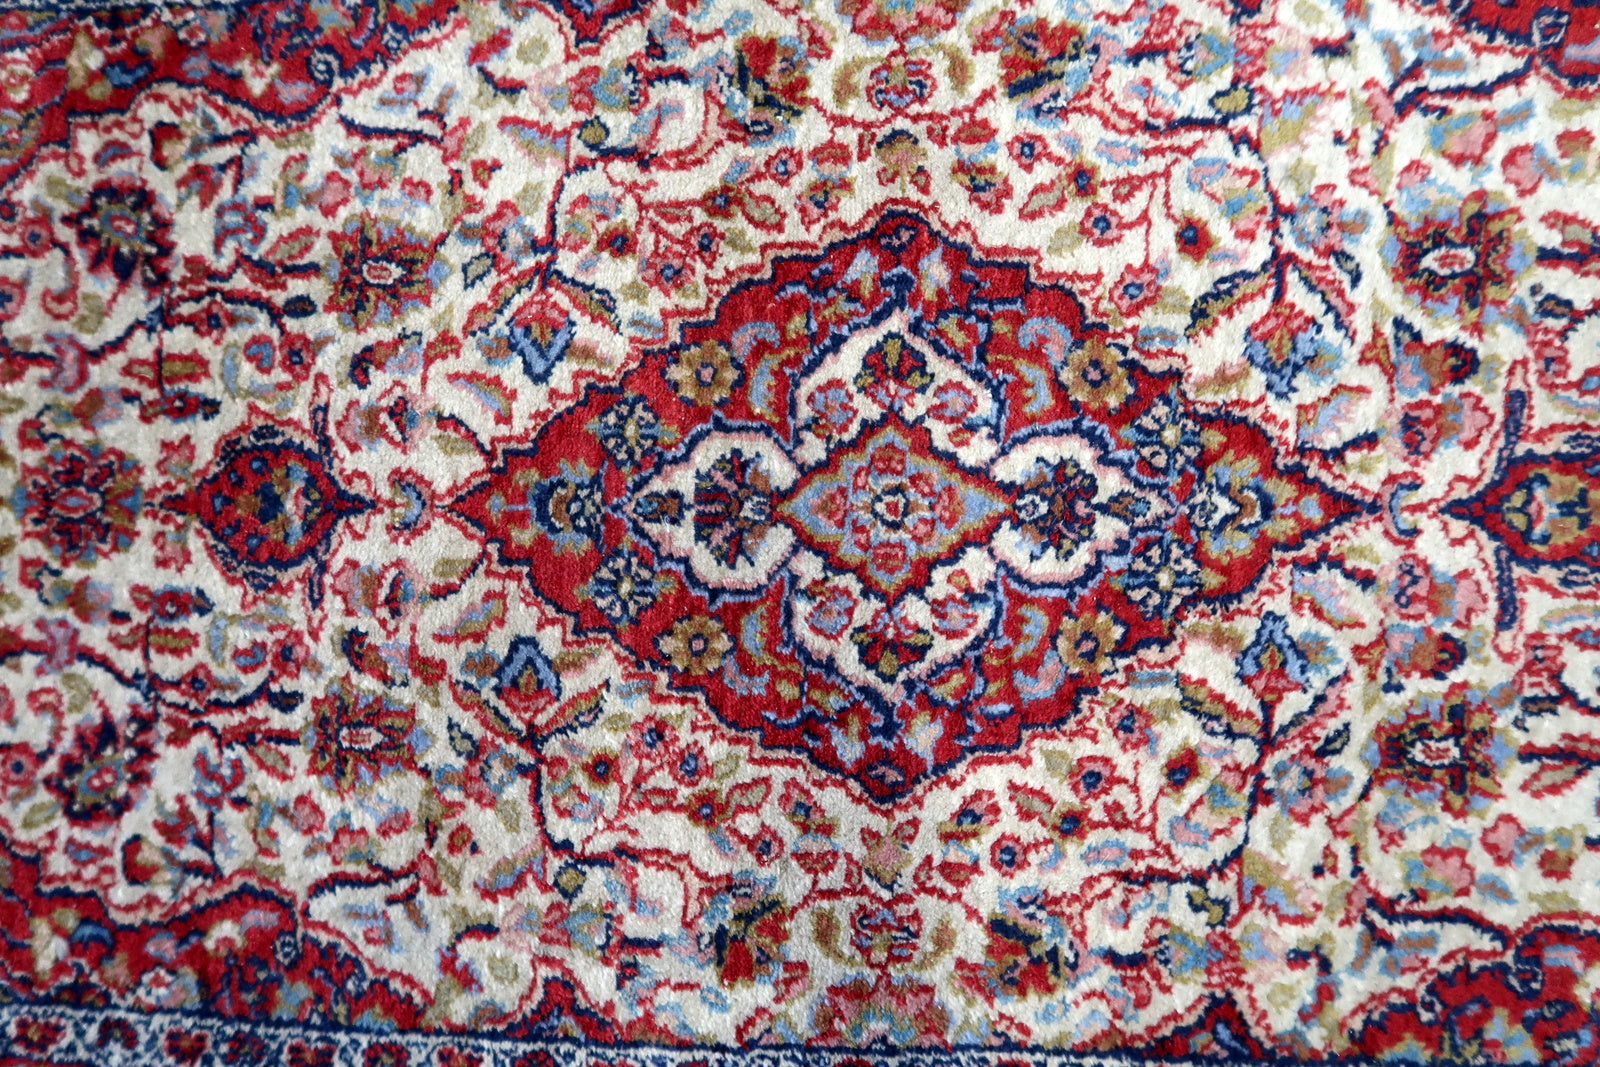 Close-up of the intricate floral elements woven into the rug's design